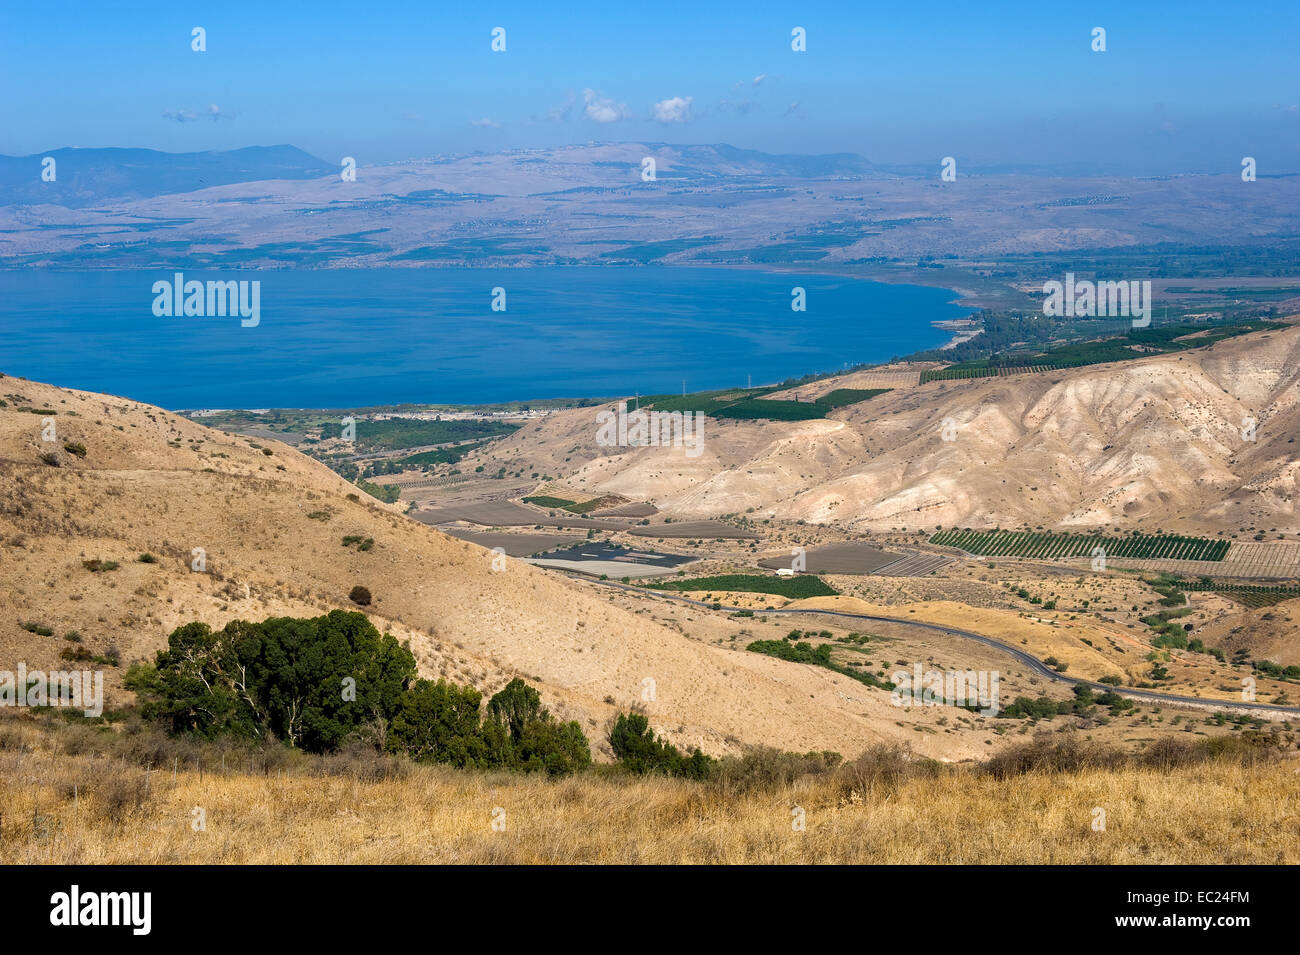 The northern part of the Sea of Galilee in Israel as seen from the Golan Heights Stock Photo